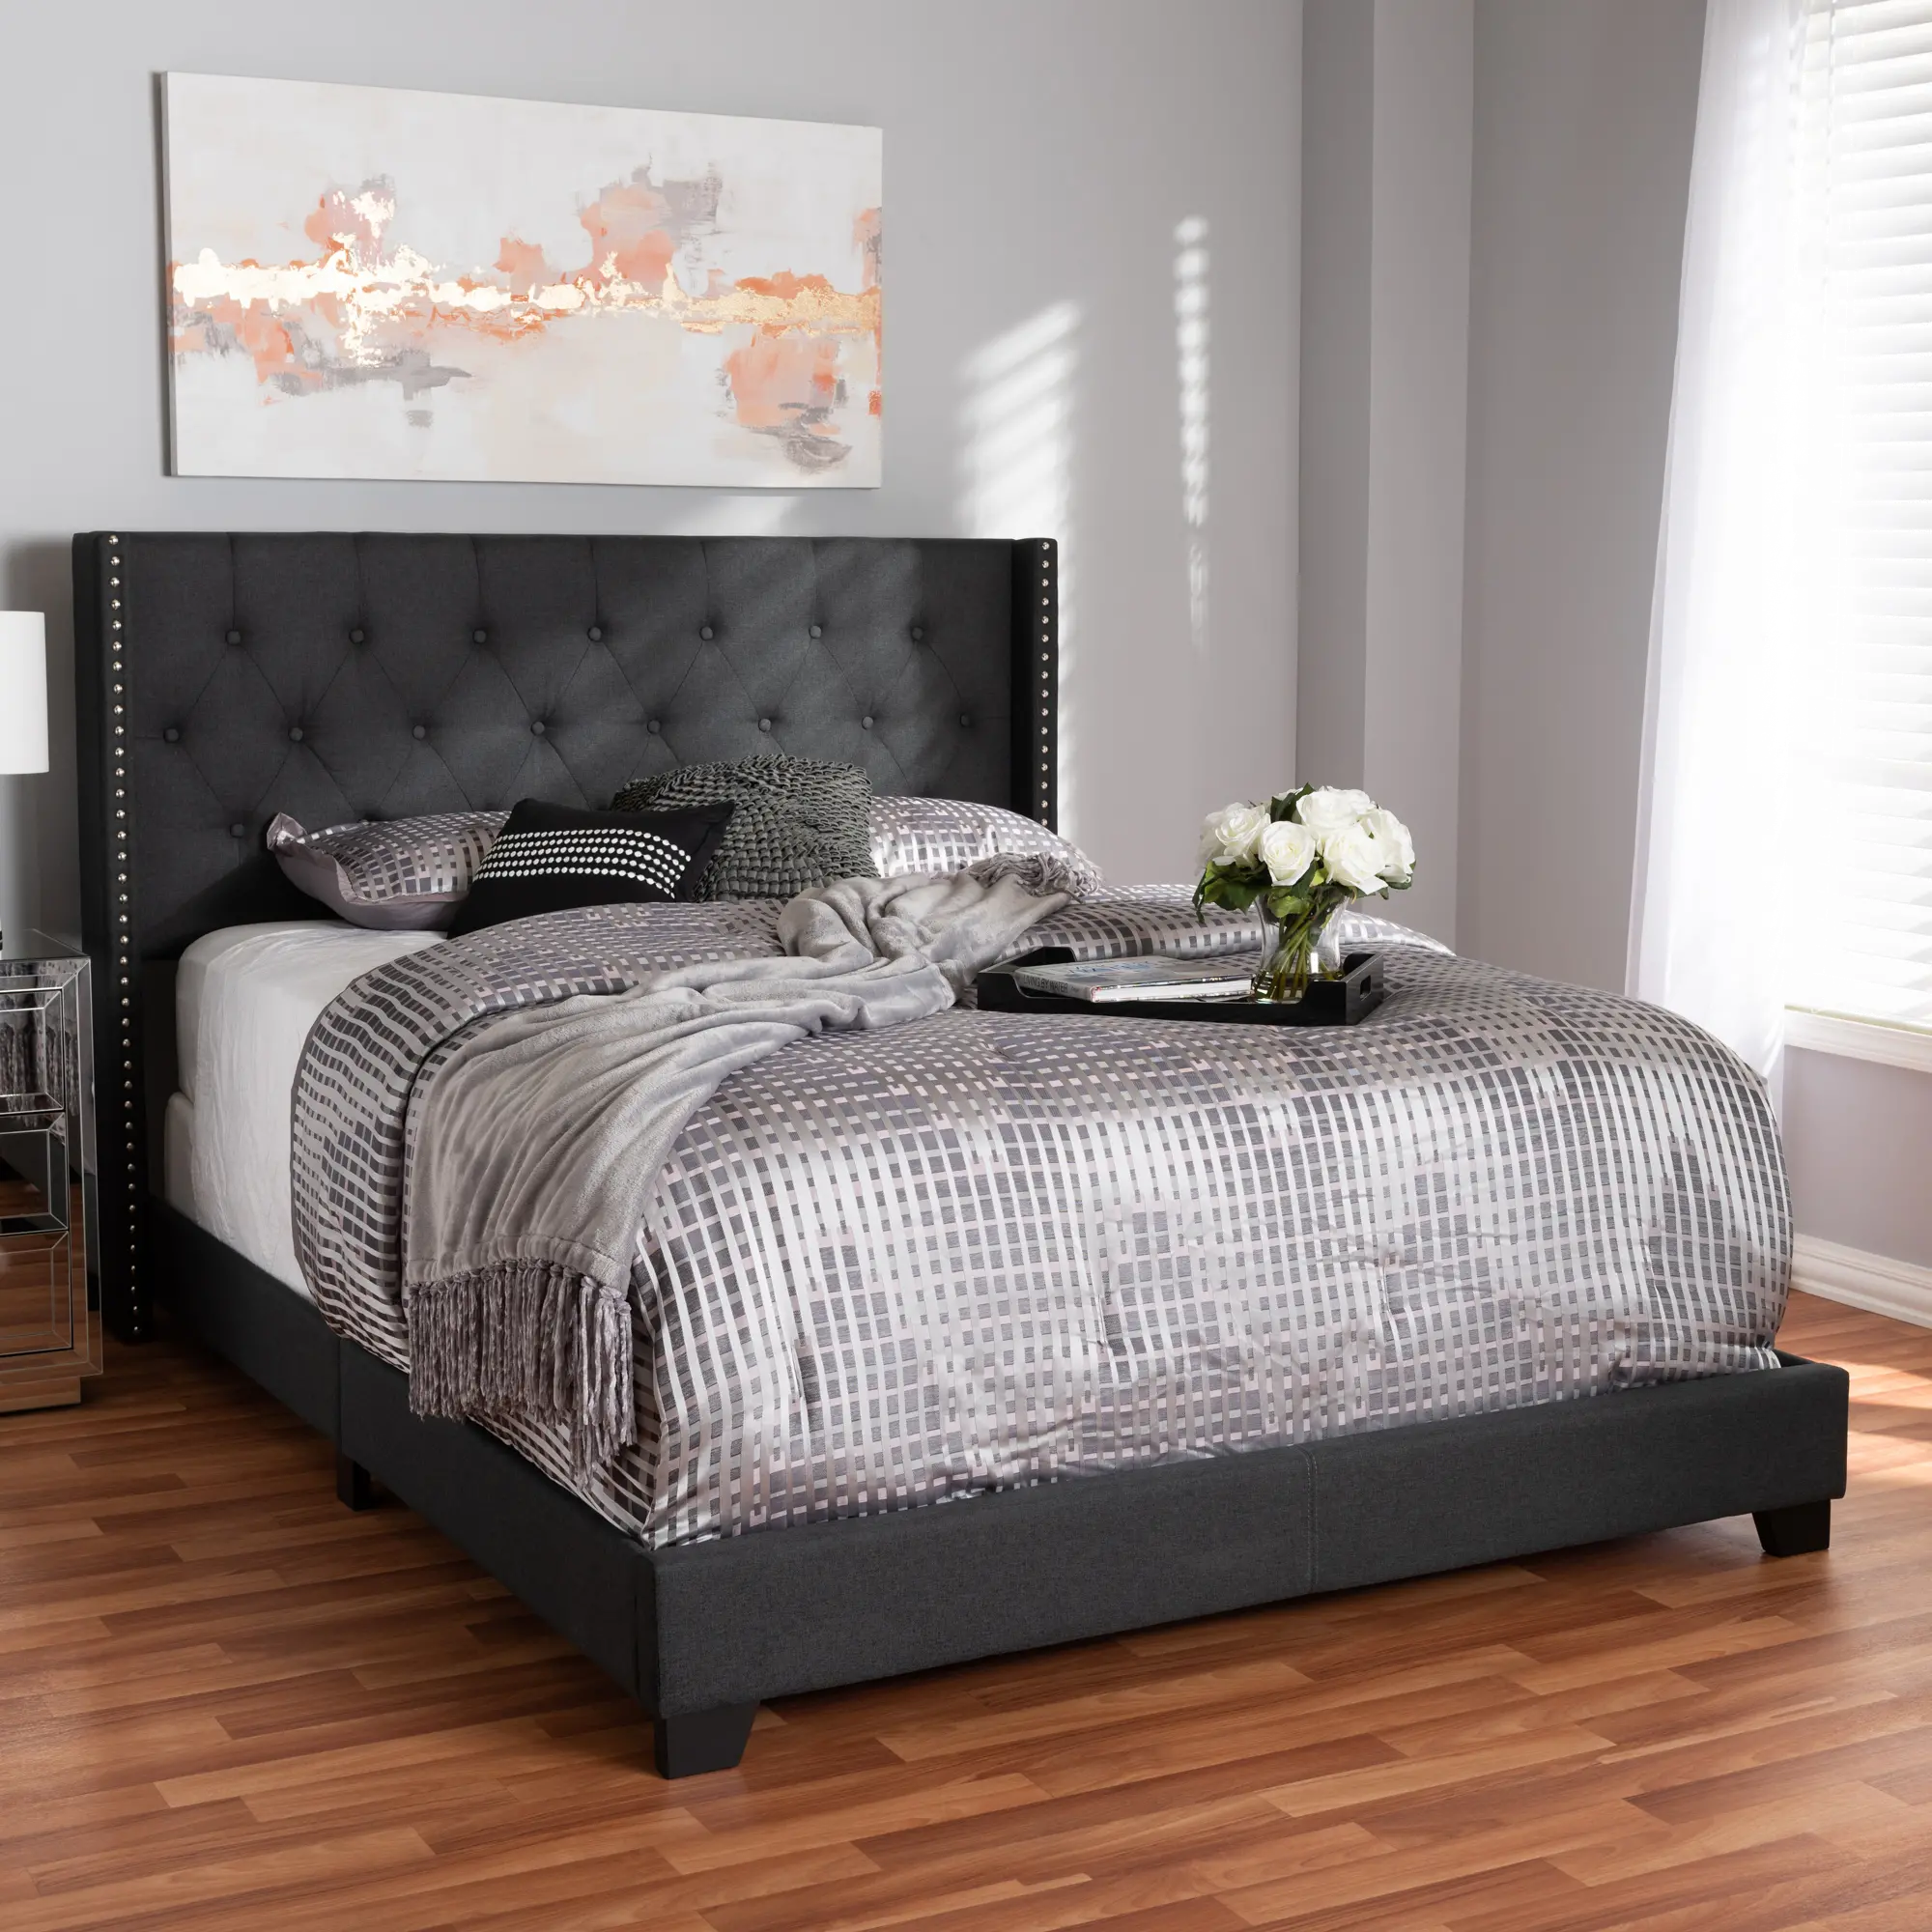 149-8943-RCW Contemporary Charcoal Upholstered King Bed - Westl sku 149-8943-RCW